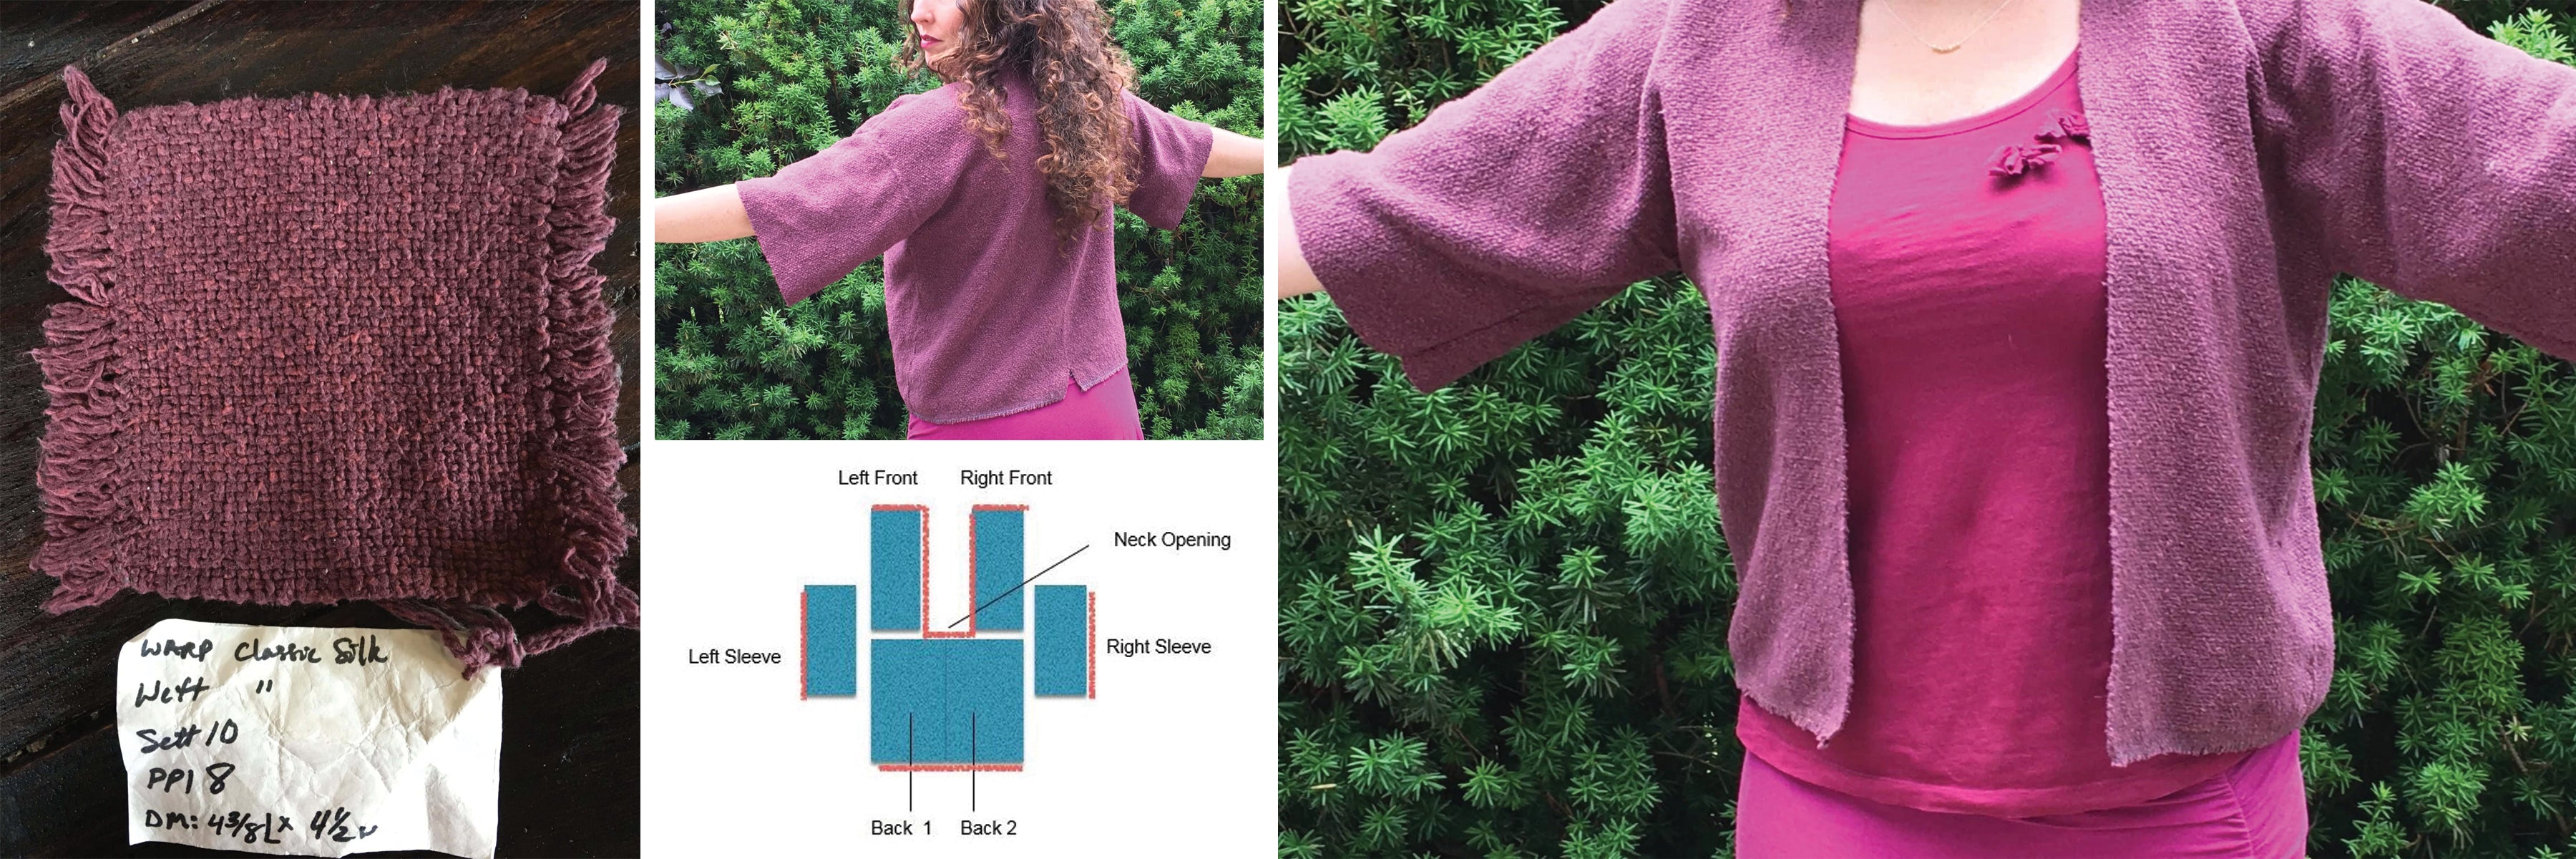 Converting a Knitting Pattern to a Weaving Pattern - Part 1